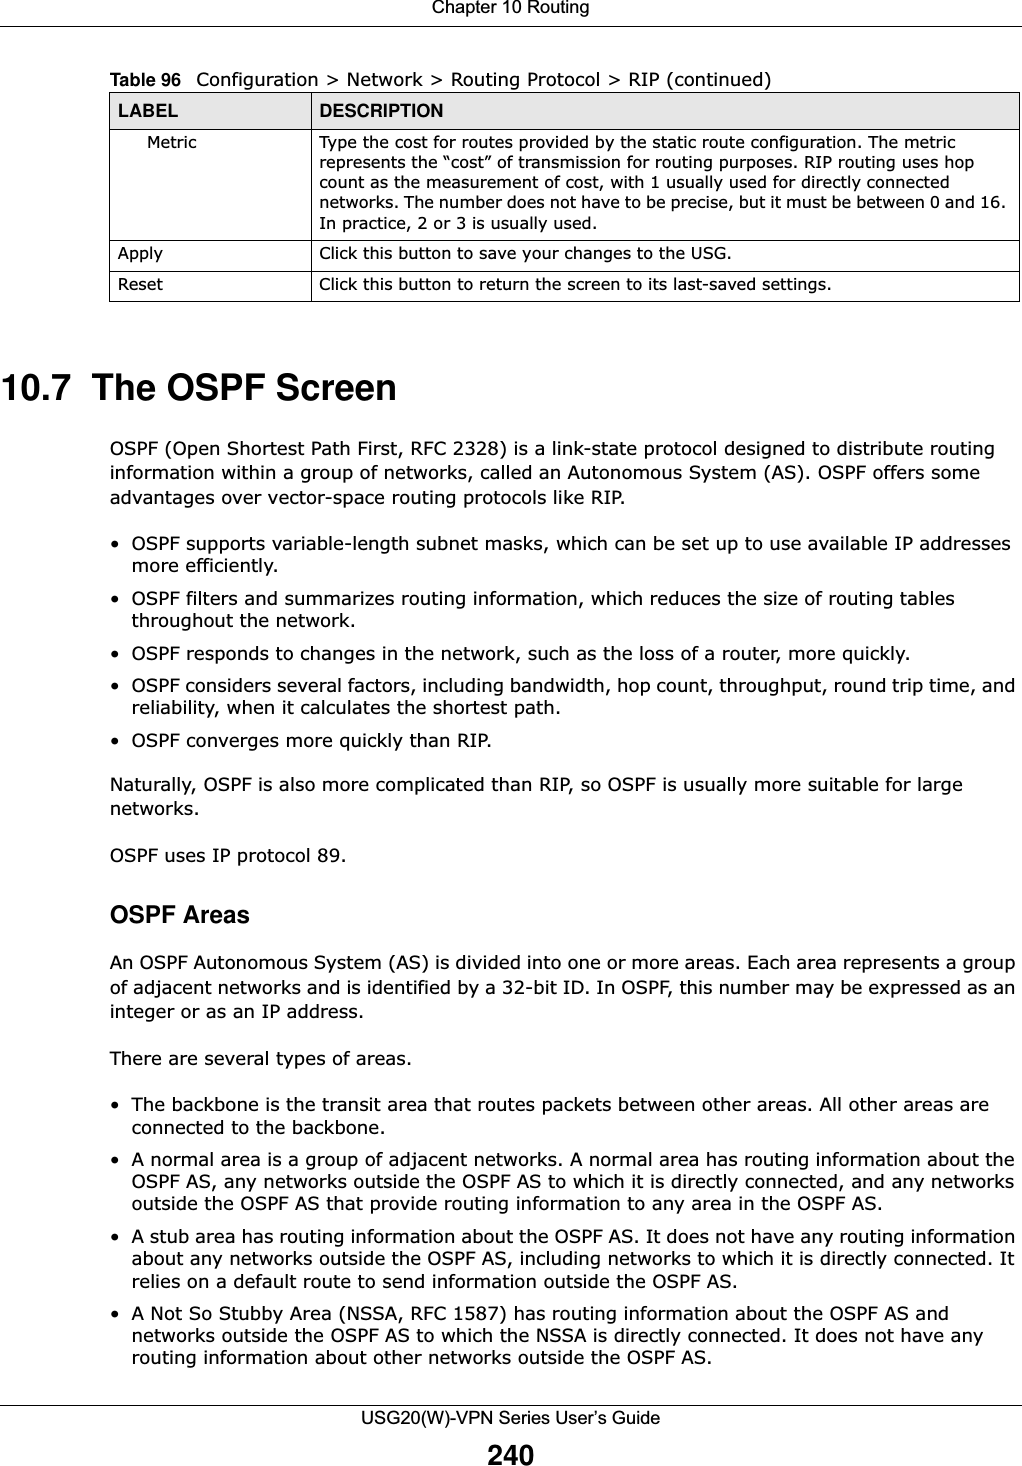 Chapter 10 RoutingUSG20(W)-VPN Series User’s Guide24010.7  The OSPF ScreenOSPF (Open Shortest Path First, RFC 2328) is a link-state protocol designed to distribute routing information within a group of networks, called an Autonomous System (AS). OSPF offers some advantages over vector-space routing protocols like RIP.• OSPF supports variable-length subnet masks, which can be set up to use available IP addresses more efficiently.• OSPF filters and summarizes routing information, which reduces the size of routing tables throughout the network.• OSPF responds to changes in the network, such as the loss of a router, more quickly.• OSPF considers several factors, including bandwidth, hop count, throughput, round trip time, and reliability, when it calculates the shortest path.• OSPF converges more quickly than RIP.Naturally, OSPF is also more complicated than RIP, so OSPF is usually more suitable for large networks.OSPF uses IP protocol 89.OSPF AreasAn OSPF Autonomous System (AS) is divided into one or more areas. Each area represents a group of adjacent networks and is identified by a 32-bit ID. In OSPF, this number may be expressed as an integer or as an IP address.There are several types of areas.• The backbone is the transit area that routes packets between other areas. All other areas are connected to the backbone.• A normal area is a group of adjacent networks. A normal area has routing information about the OSPF AS, any networks outside the OSPF AS to which it is directly connected, and any networks outside the OSPF AS that provide routing information to any area in the OSPF AS.• A stub area has routing information about the OSPF AS. It does not have any routing information about any networks outside the OSPF AS, including networks to which it is directly connected. It relies on a default route to send information outside the OSPF AS.• A Not So Stubby Area (NSSA, RFC 1587) has routing information about the OSPF AS and networks outside the OSPF AS to which the NSSA is directly connected. It does not have any routing information about other networks outside the OSPF AS.Metric Type the cost for routes provided by the static route configuration. The metric represents the “cost” of transmission for routing purposes. RIP routing uses hop count as the measurement of cost, with 1 usually used for directly connected networks. The number does not have to be precise, but it must be between 0 and 16. In practice, 2 or 3 is usually used.Apply Click this button to save your changes to the USG. Reset Click this button to return the screen to its last-saved settings. Table 96   Configuration &gt; Network &gt; Routing Protocol &gt; RIP (continued)LABEL DESCRIPTION